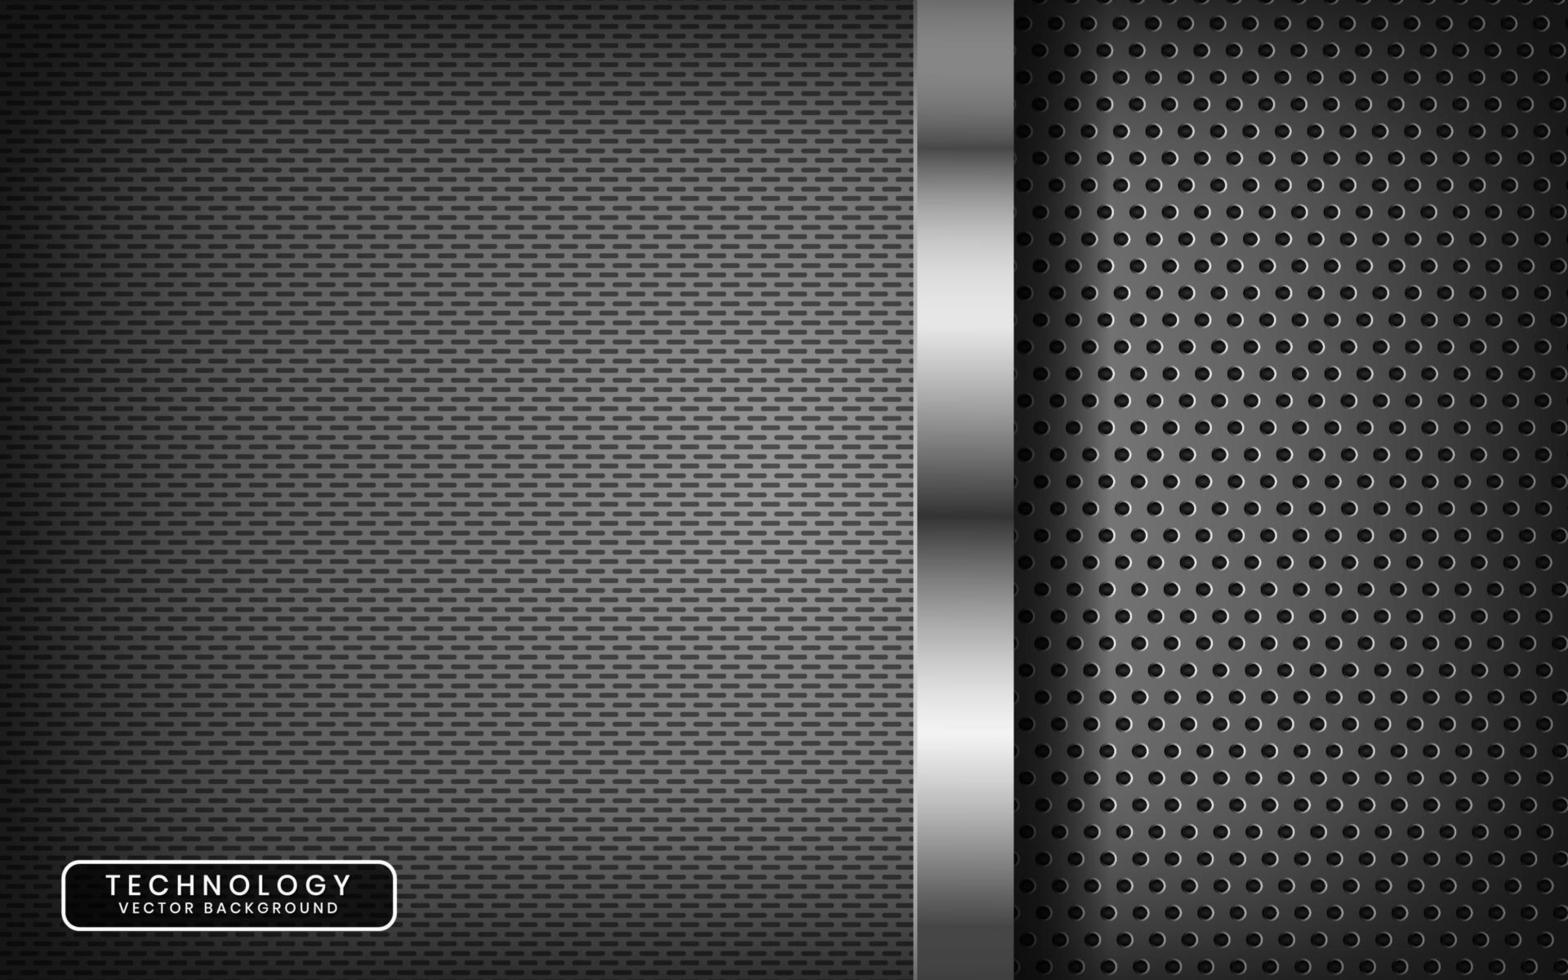 3D grey techno abstract background overlap layer on dark space with silver lines decoration. Modern graphic design element metallic style concept for banner, flyer, card, or brochure cover vector